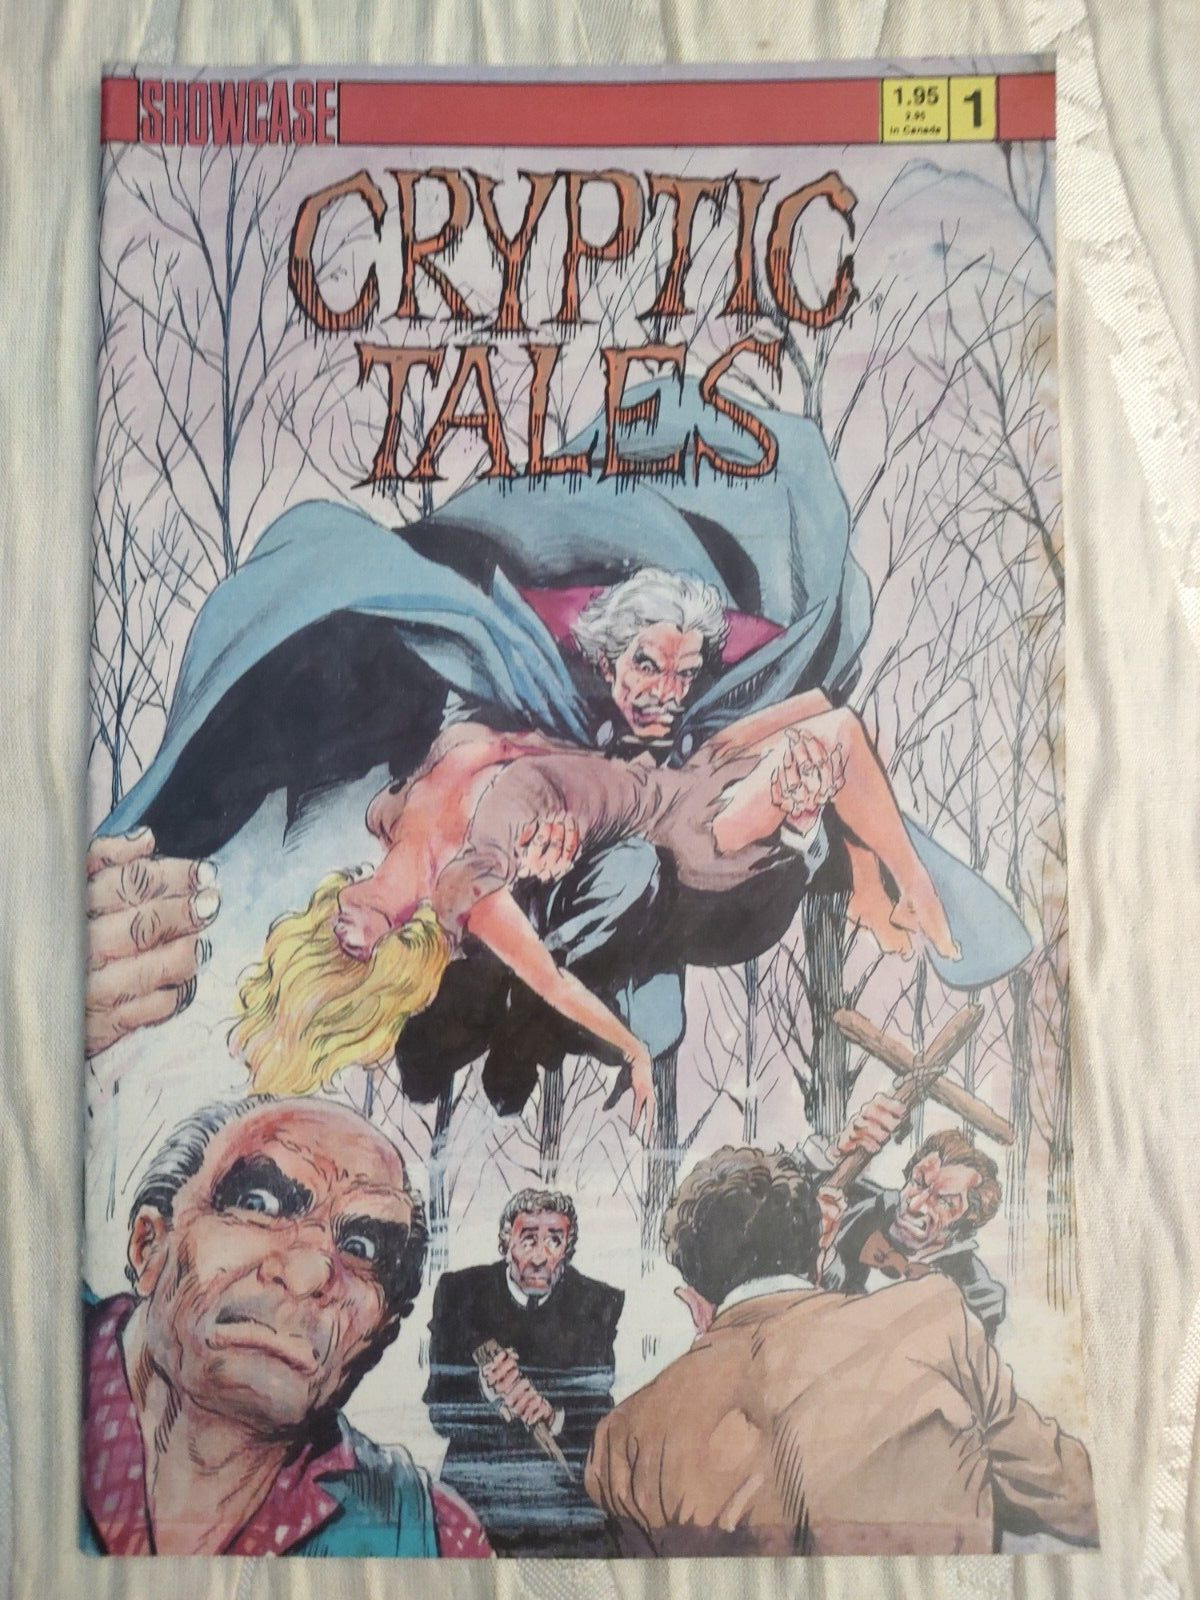 Cb21~comic book~rare cryptic tales issue #1